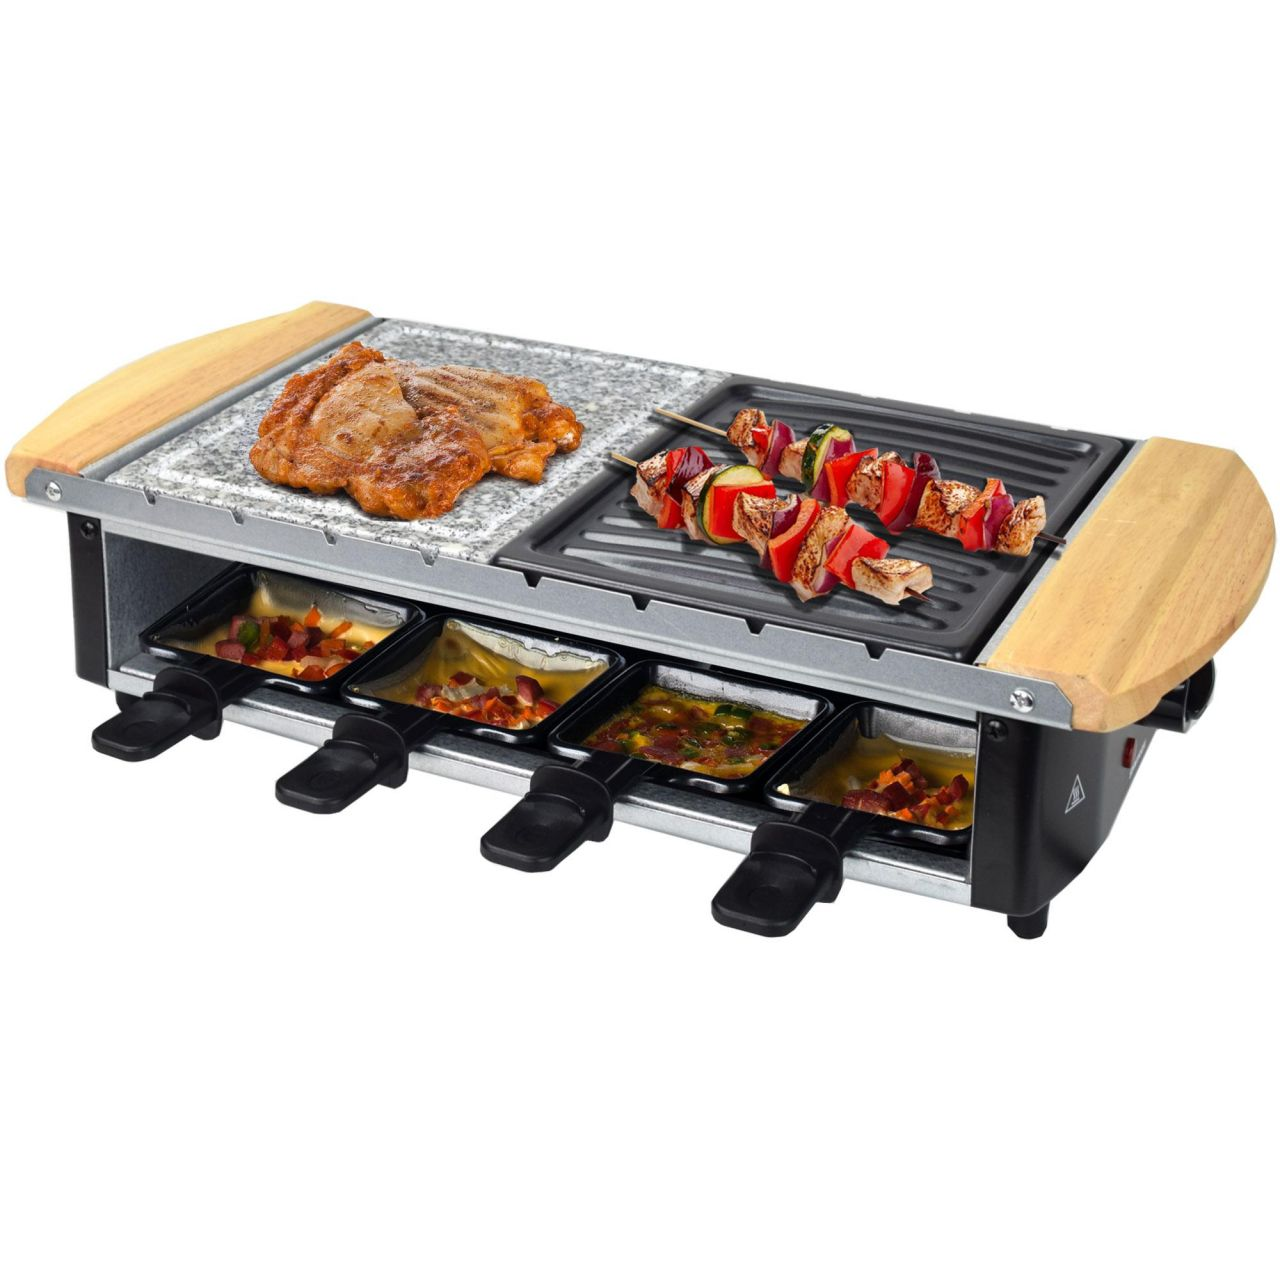 SYNTROX Raclette Raclette-Grill